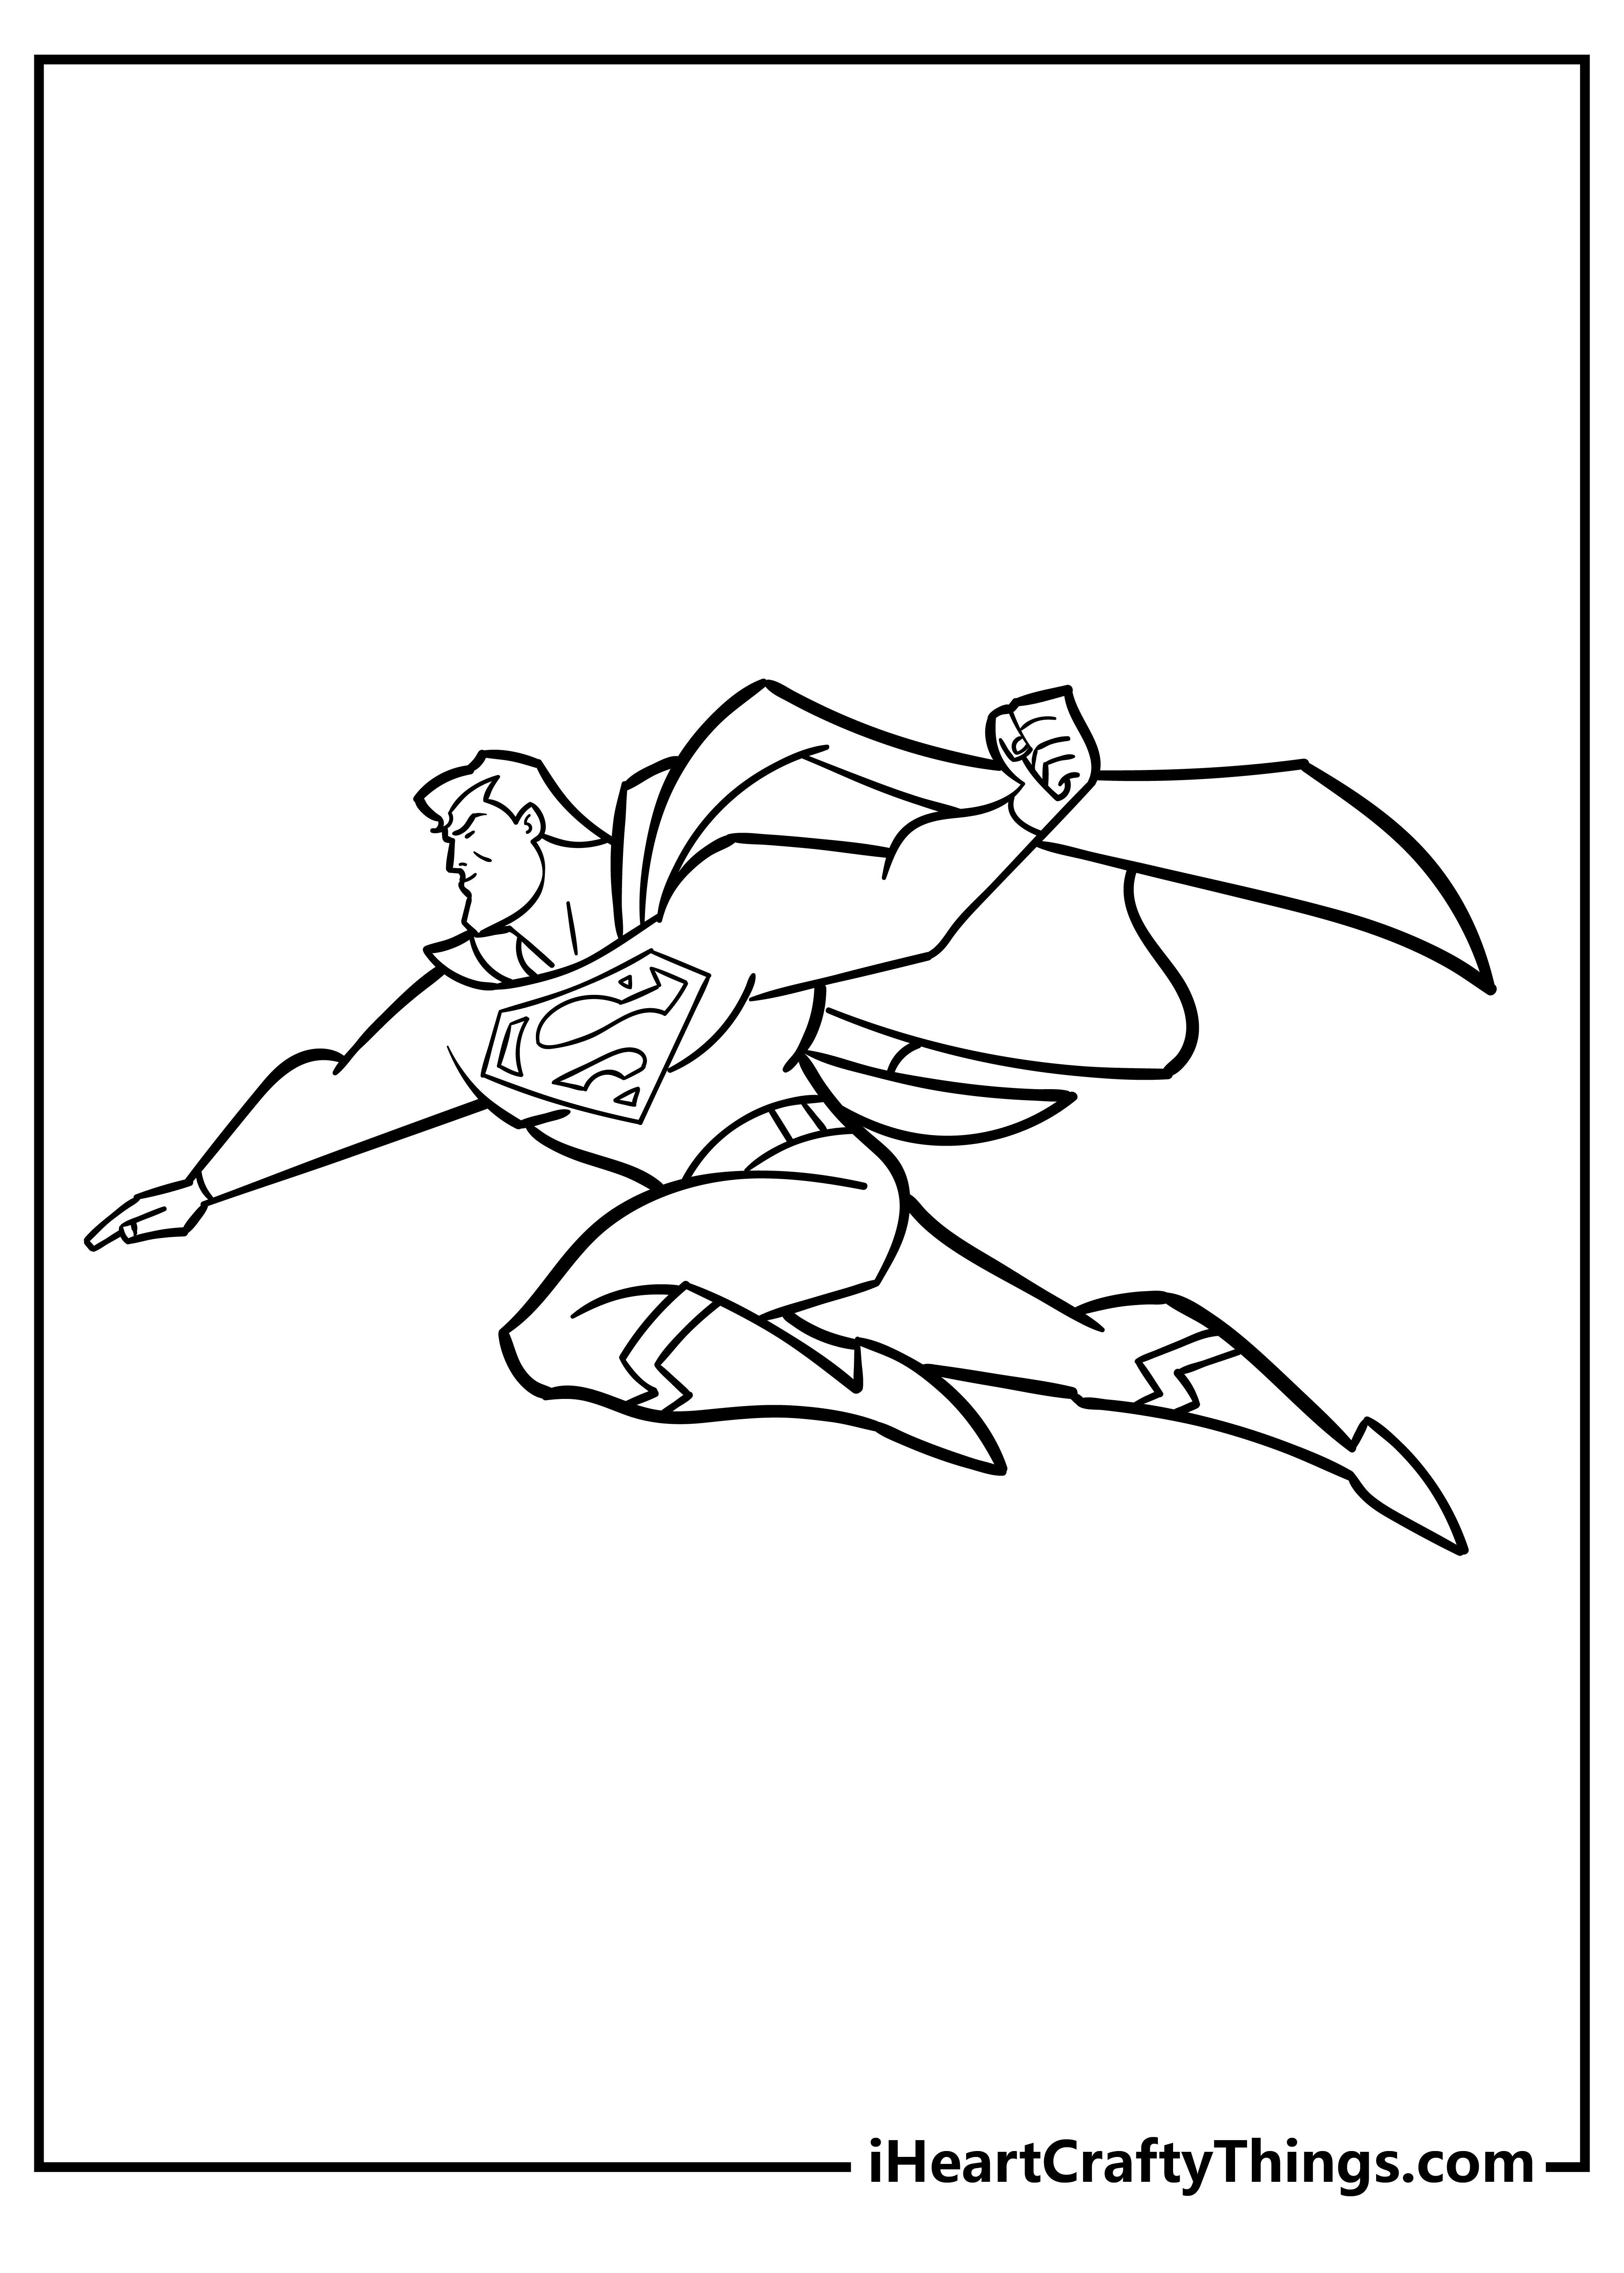 Superman Coloring Pages free pdf download